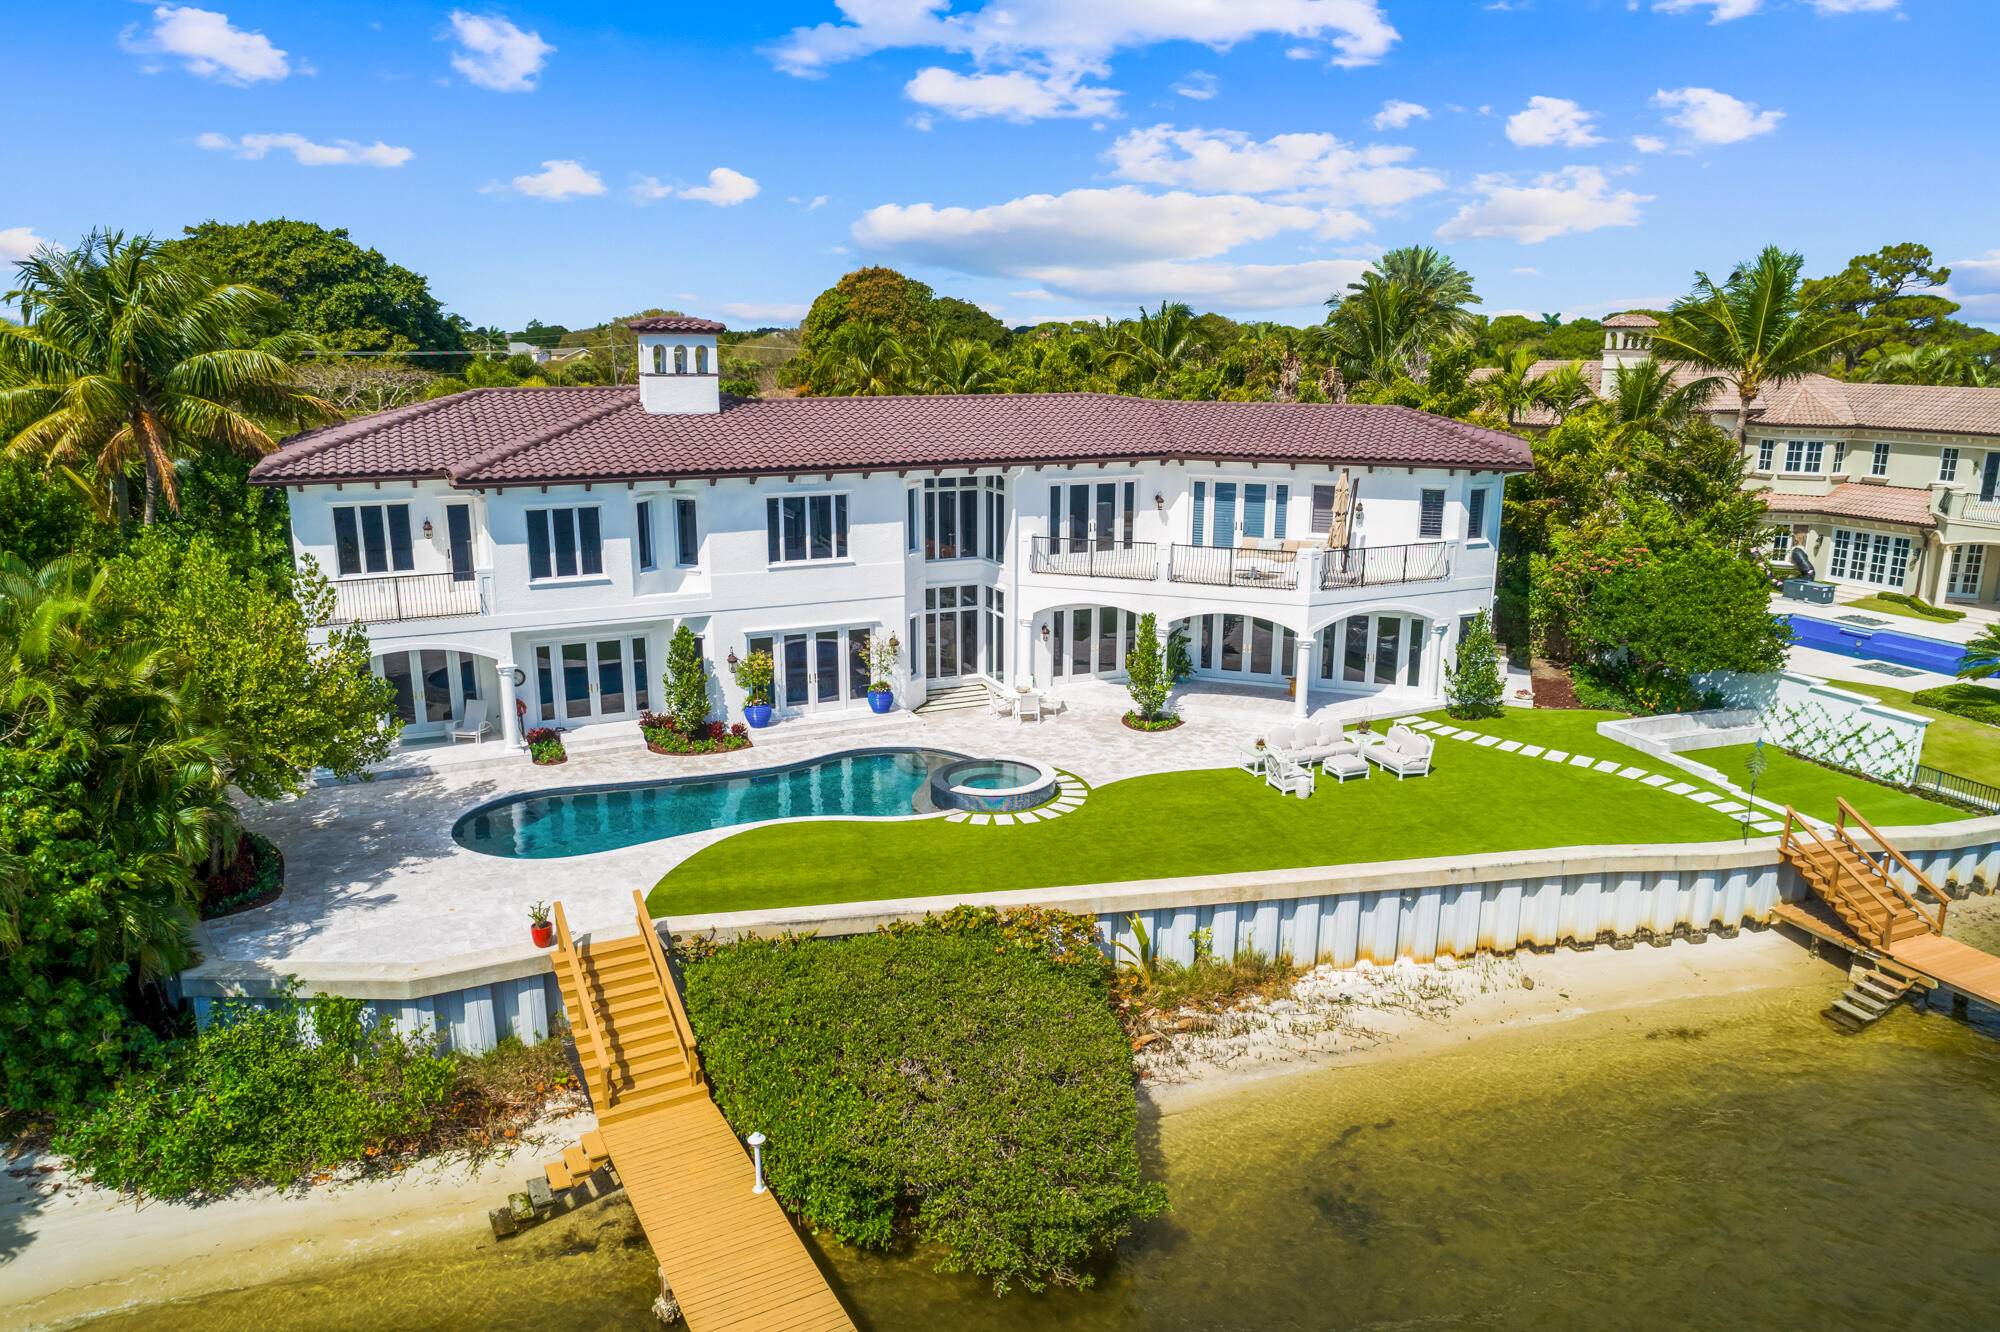 ULTIMATE LUXURY 1. 5 ACRE 140' RIVERFRONT PRIVATE ESTATE W DOUBLE GATED PRIVATE ENTRIES DOUBLE DOCK 3 LIFTS TENNIS COURTS !